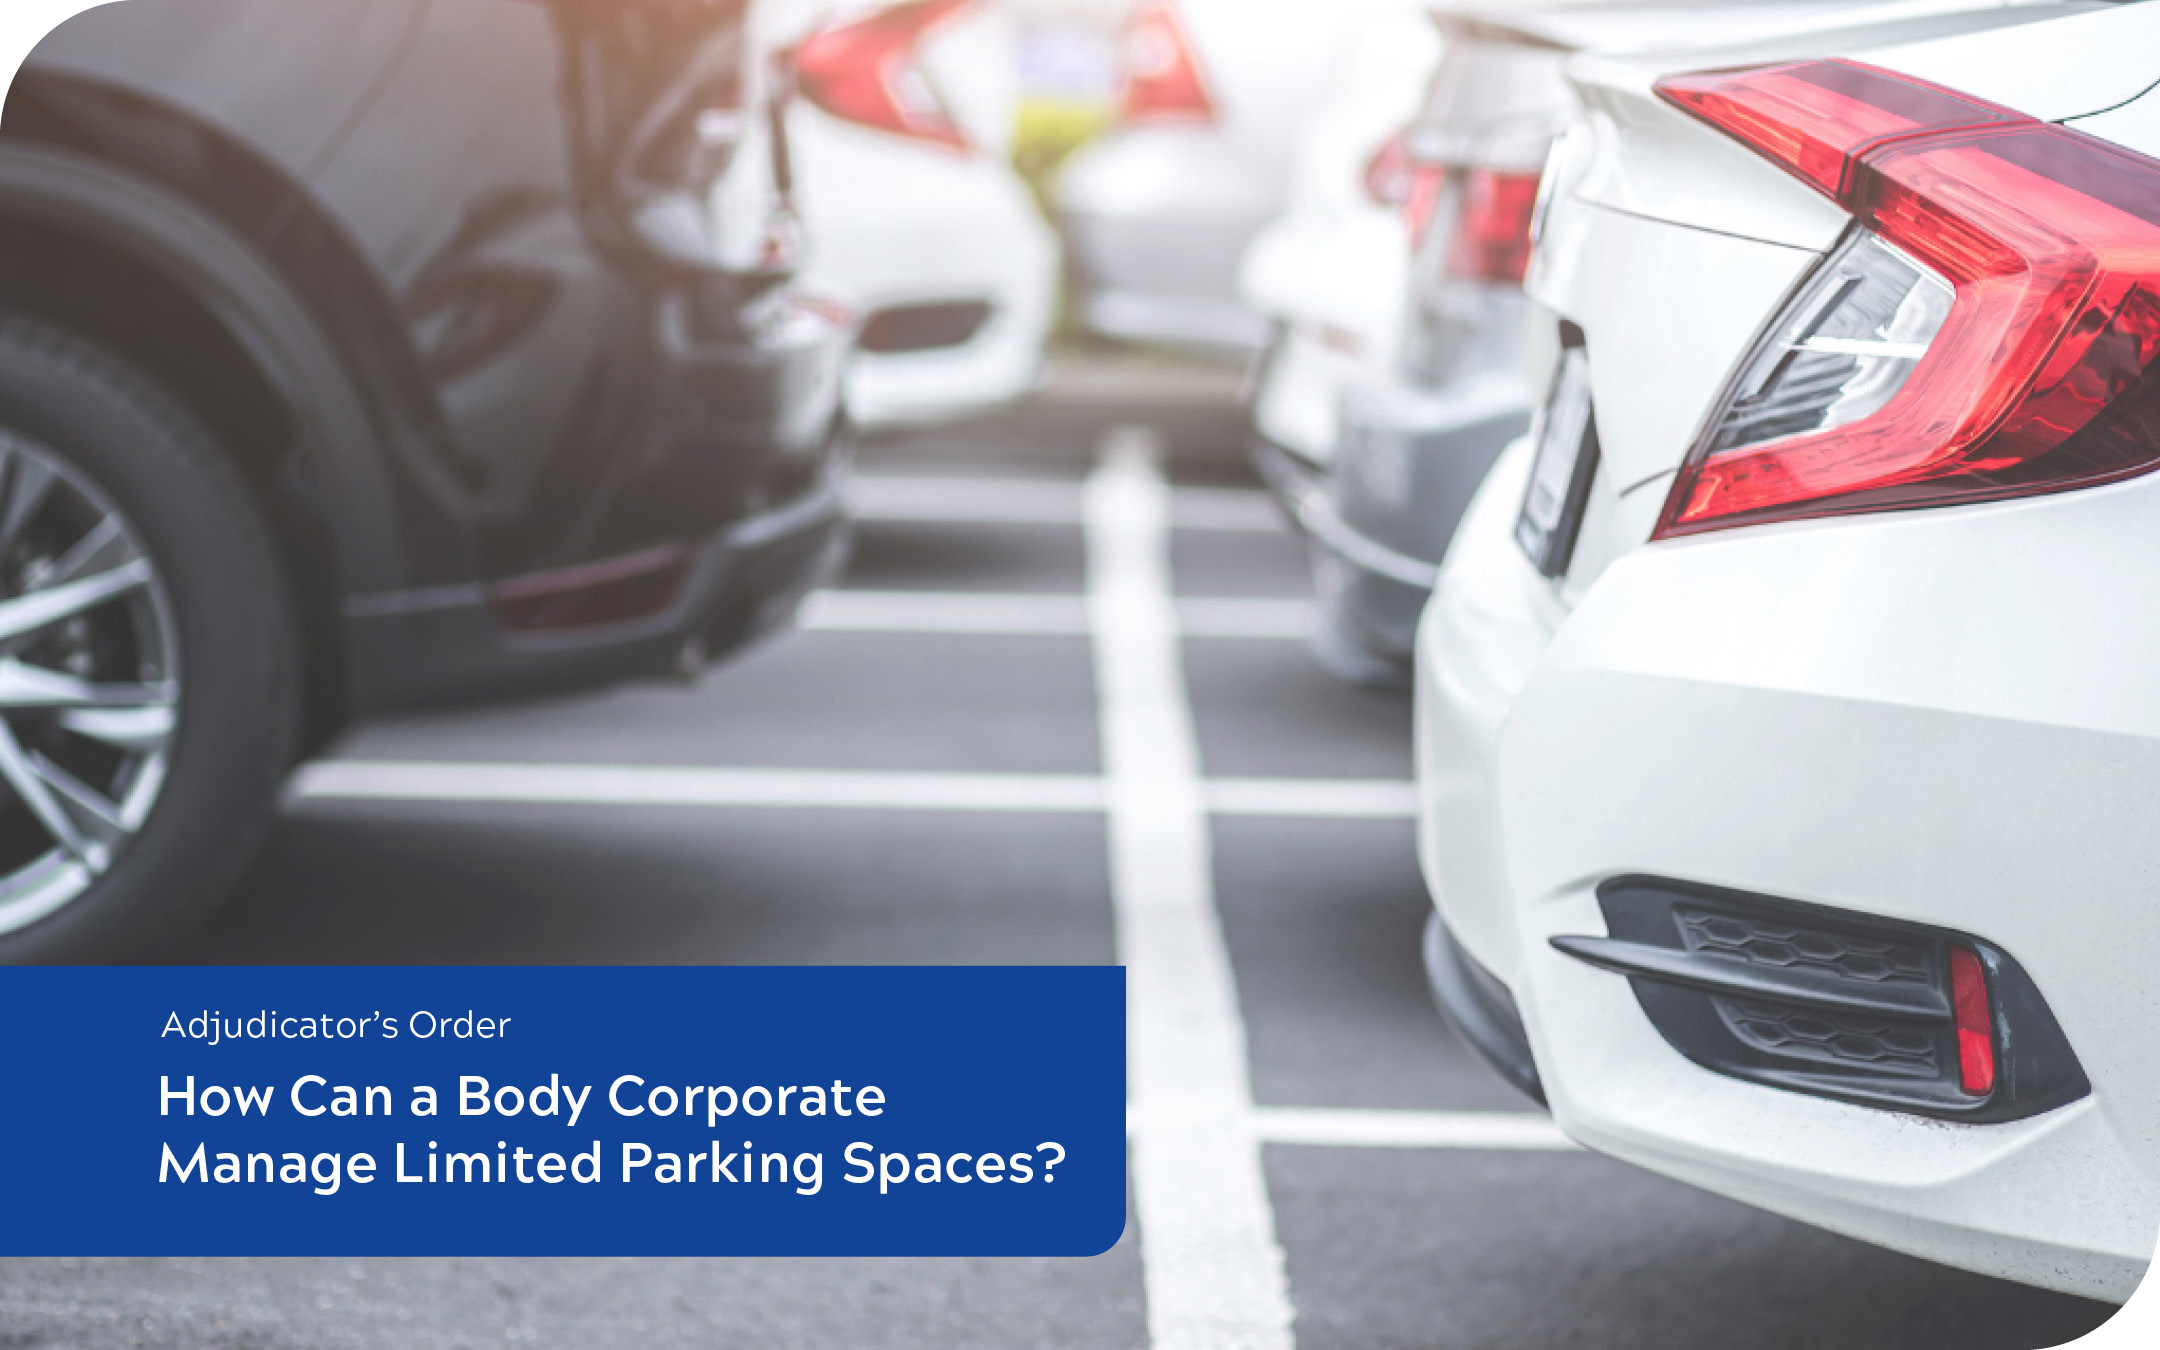 How Can a Body Corporate Manage Limited Parking Spaces?